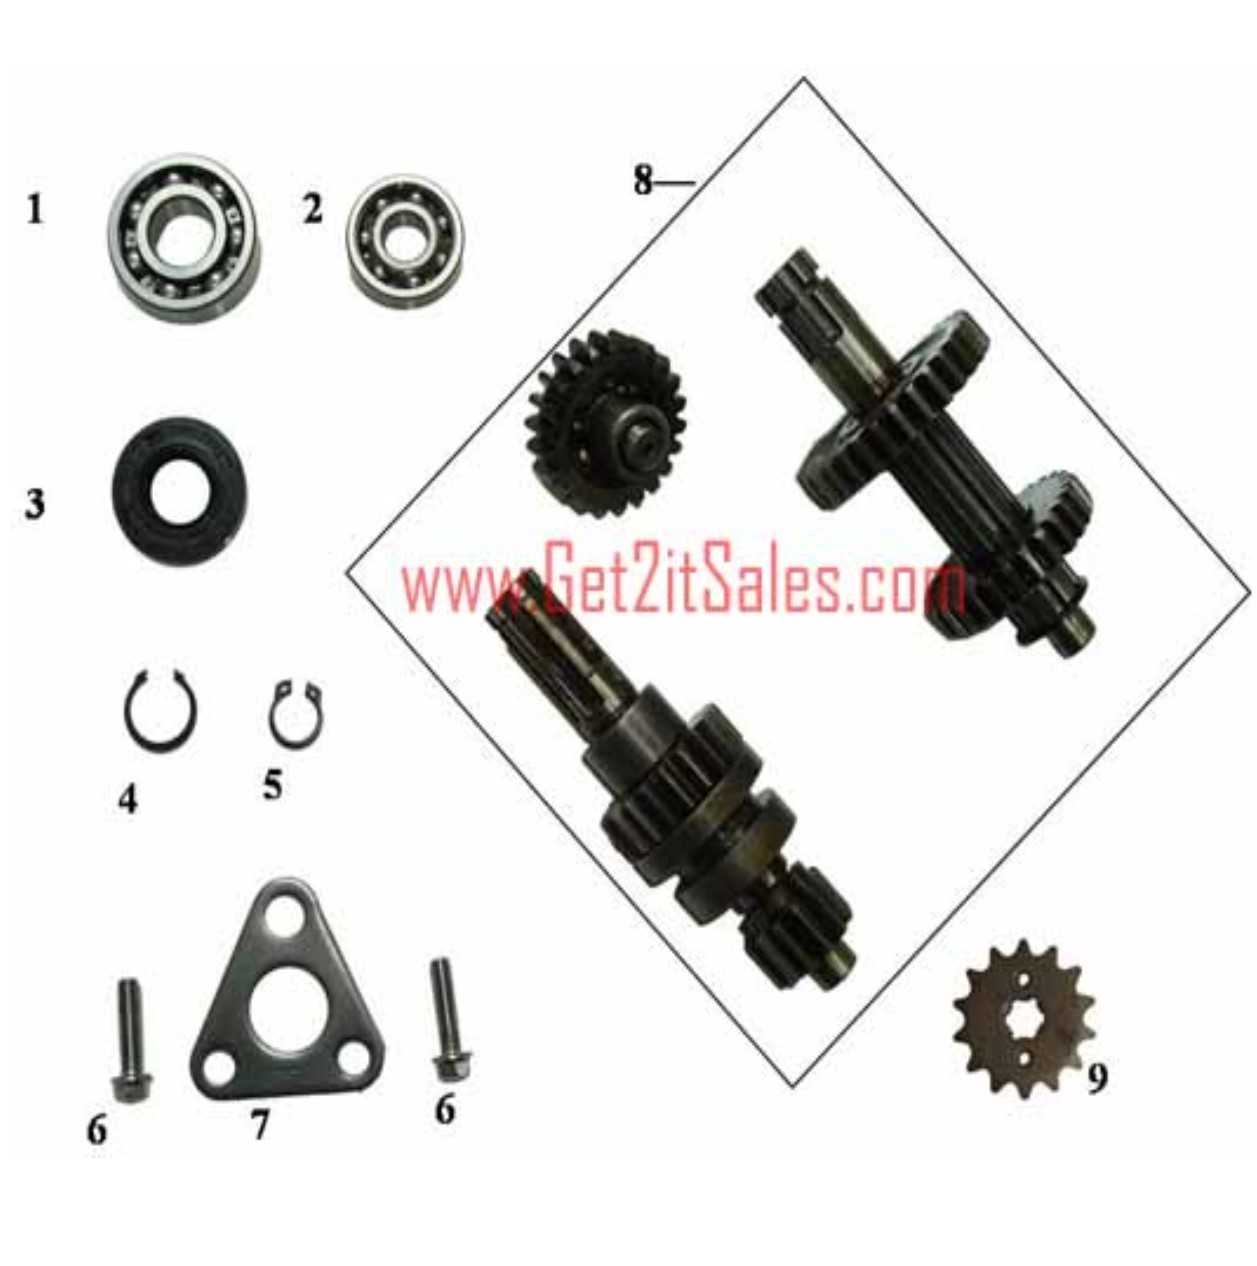 Transmission Gears (Automatic with Reverse) 90cc ATV-Dirtbikes